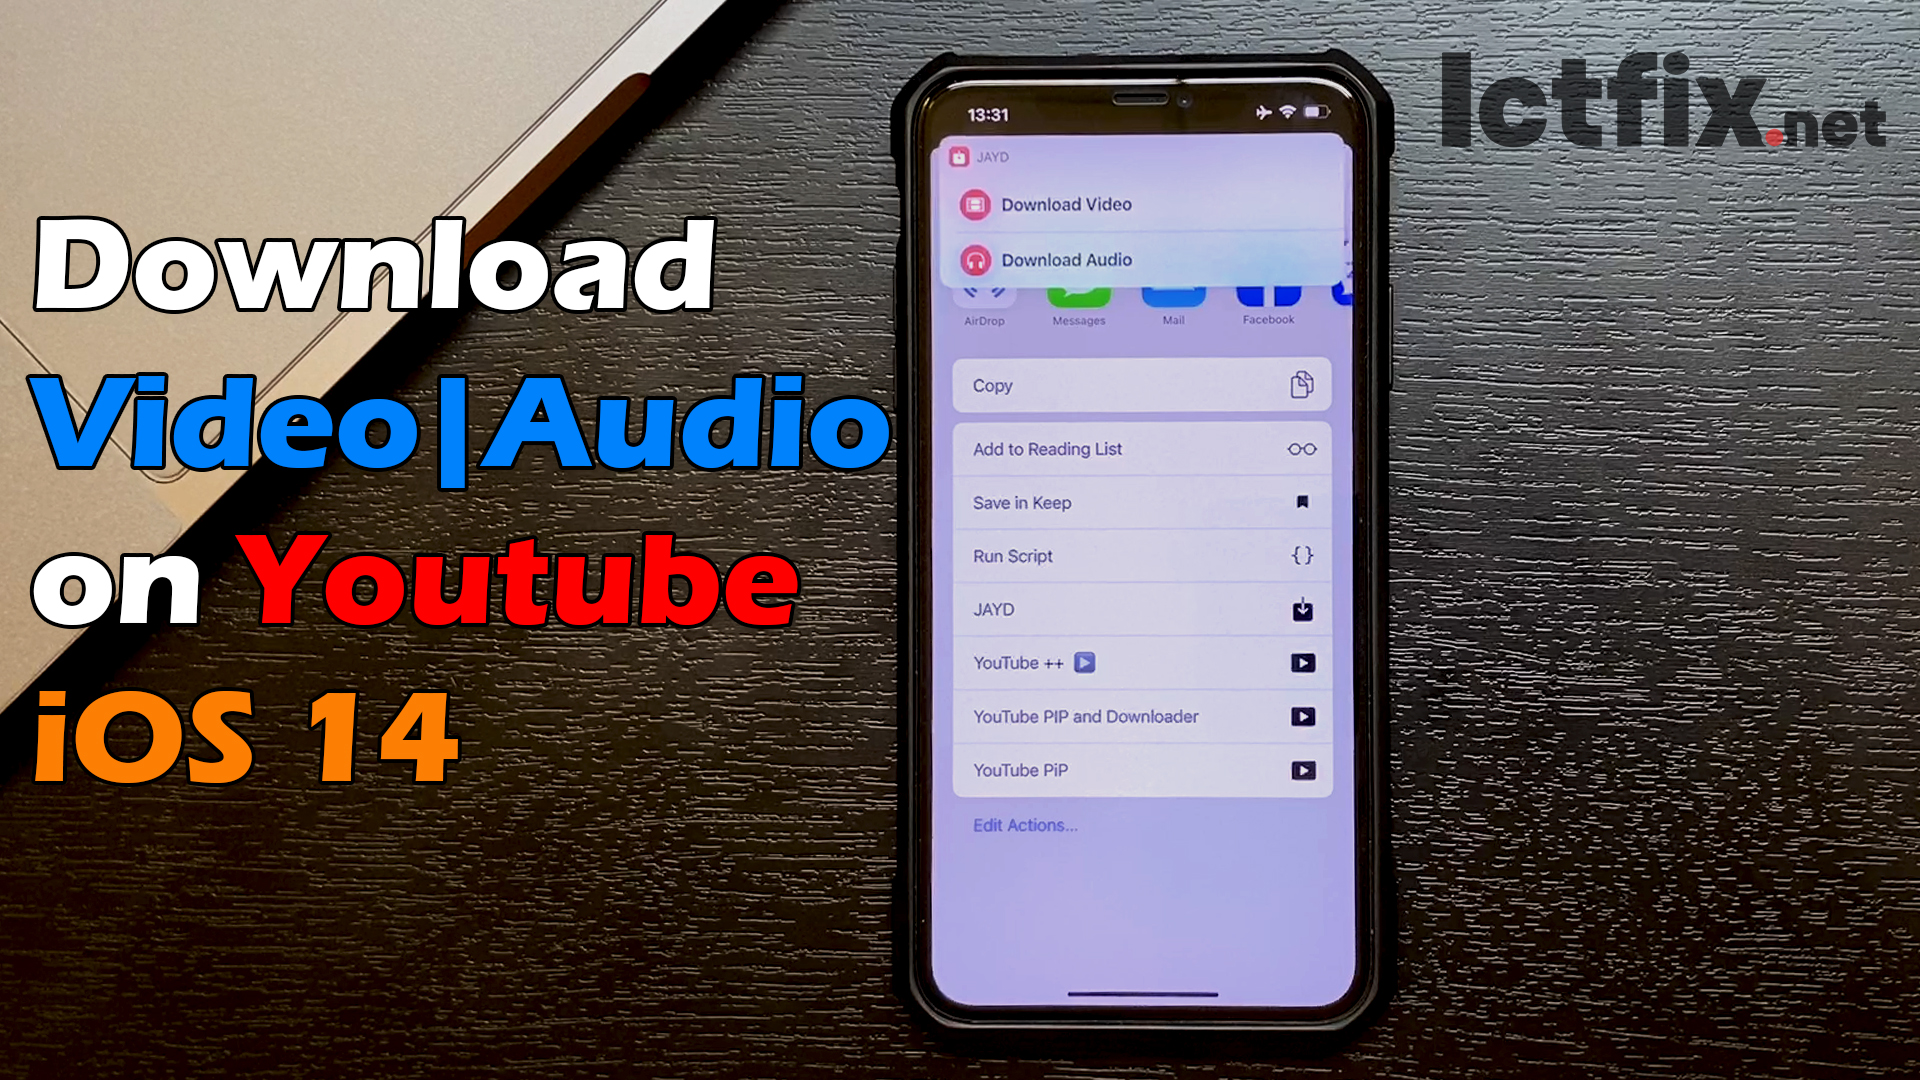 Download Video & Audio From Youtube On iPhone iOS 7 - ICTfix